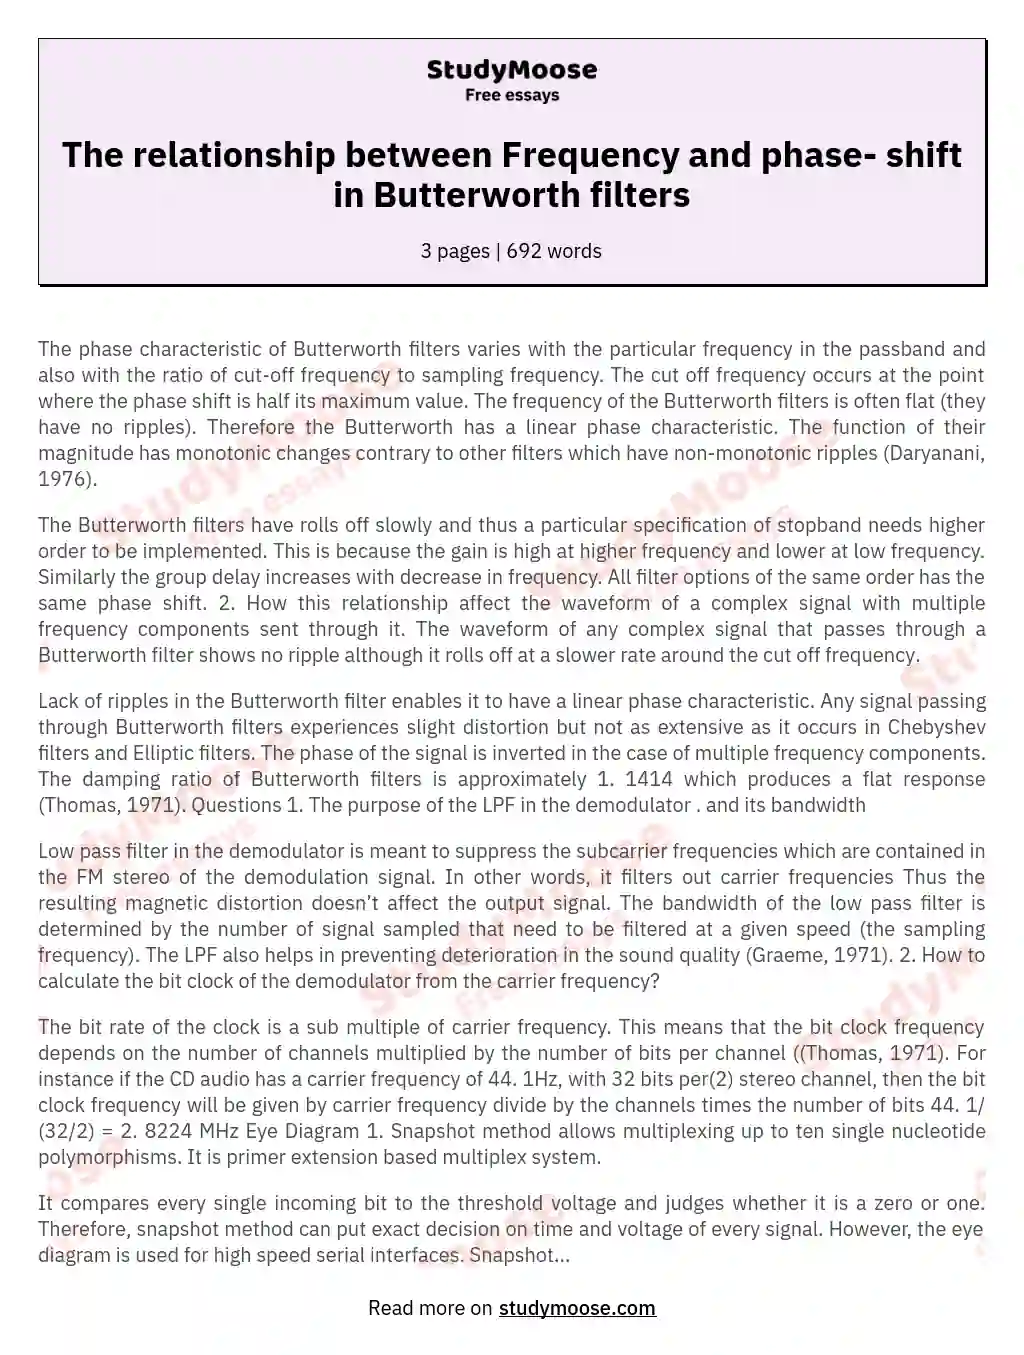 The relationship between Frequency and phase- shift in Butterworth filters